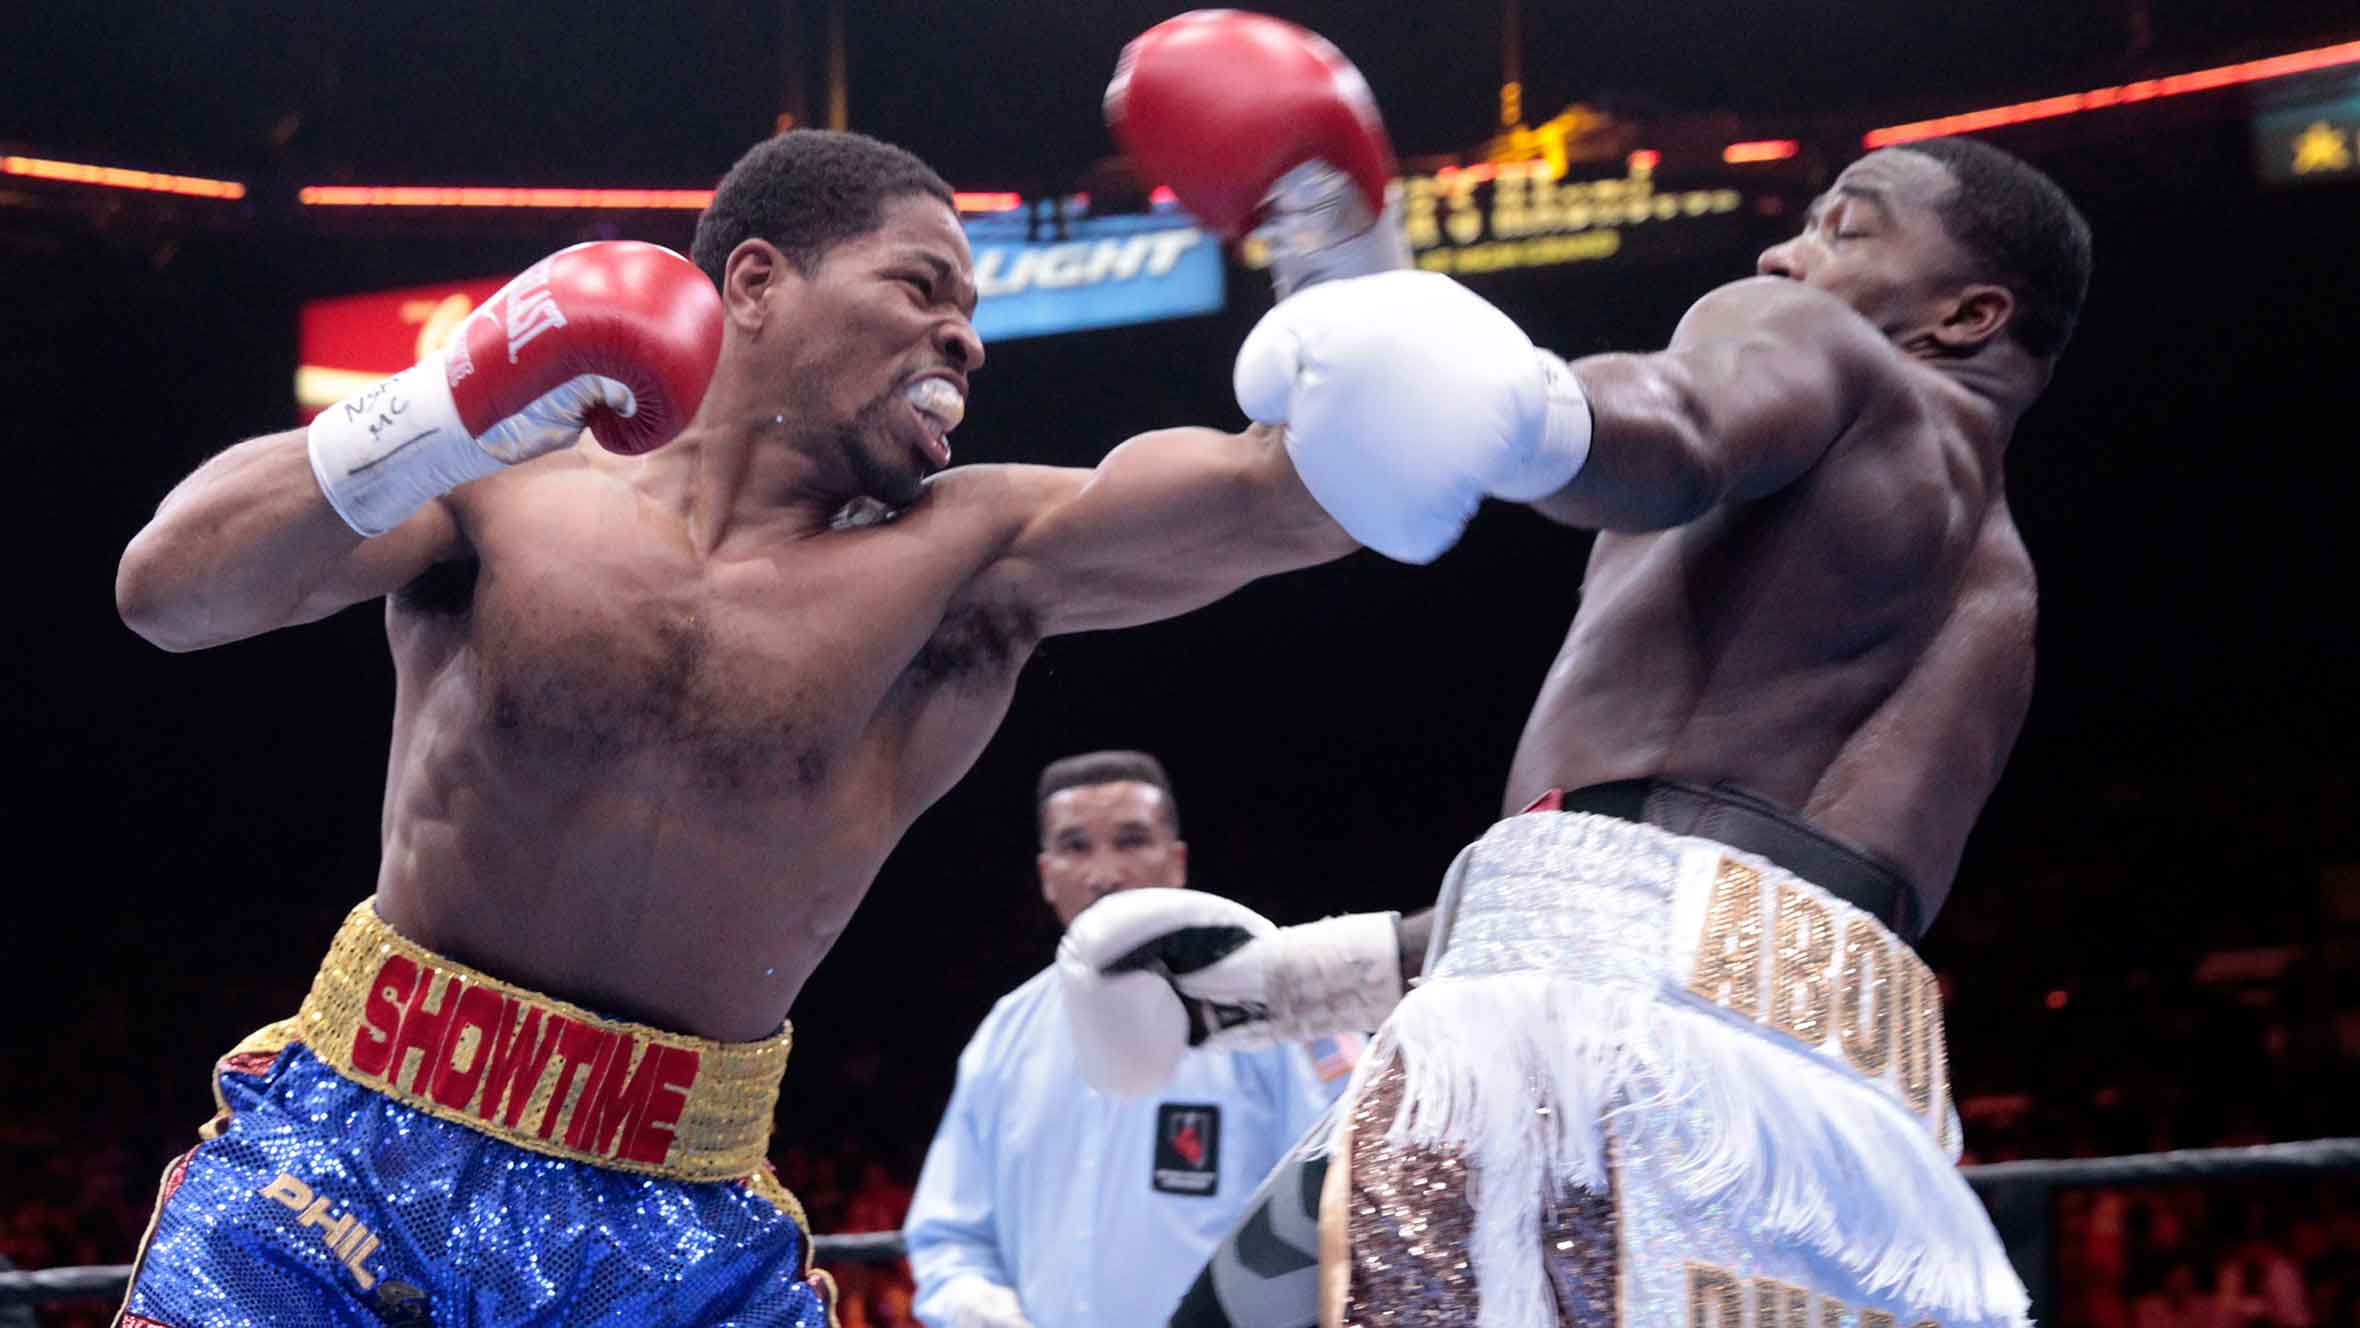 Shawn Porter powers through Adrien Broner to win a unanimous decision2360 x 1328